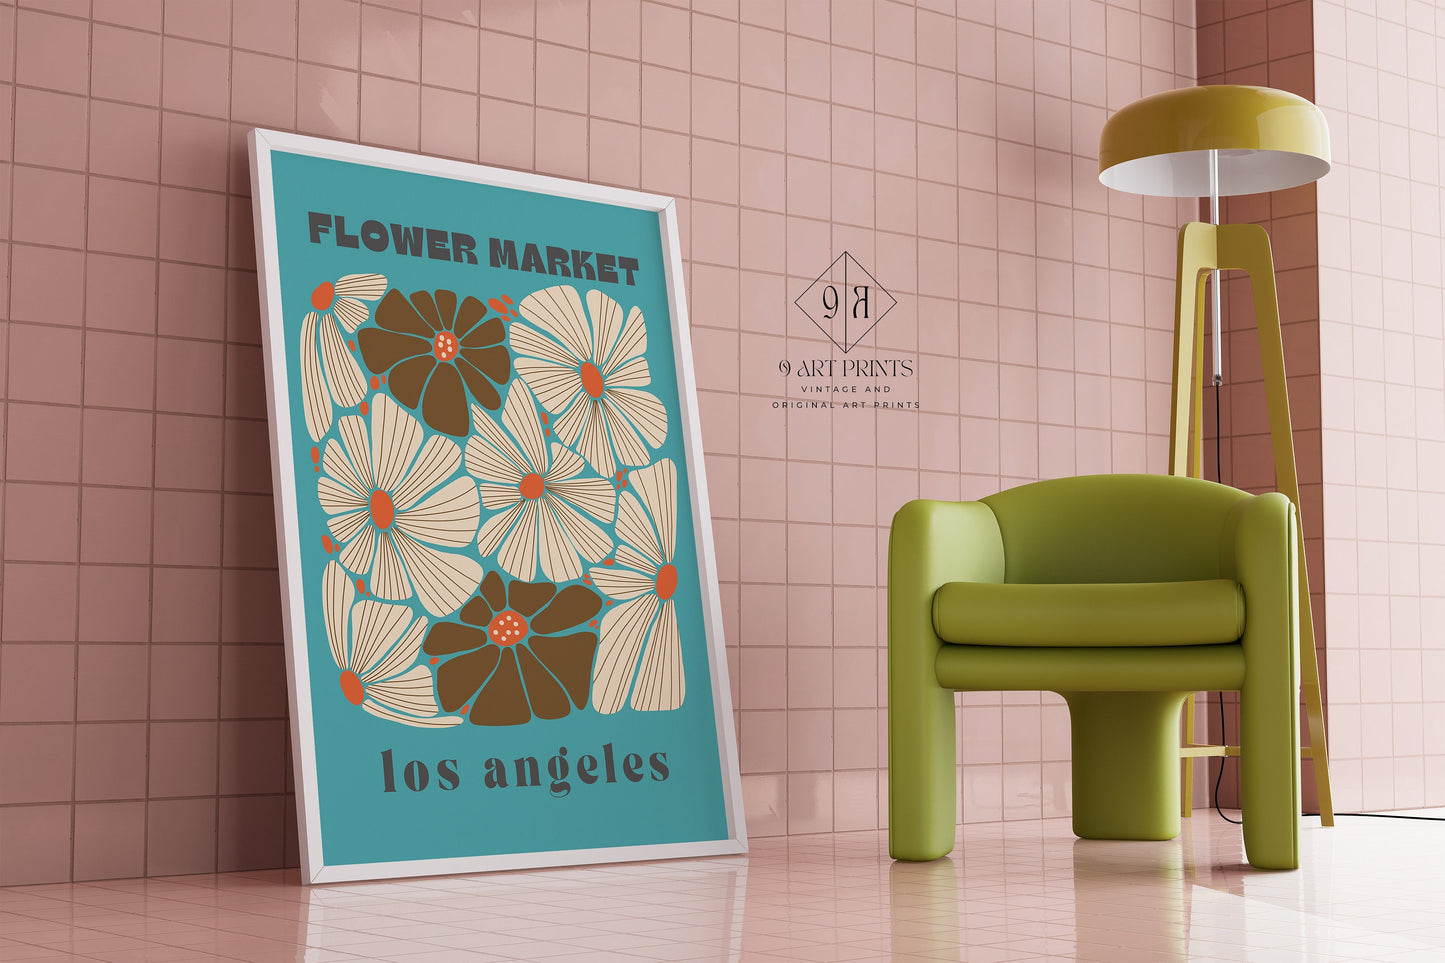 Framed Flower Market Los Angeles Groovy Retro 70s 60s Poster Botanical Floral Decor Poster Ready to hang Home Office Decor Gift for Her